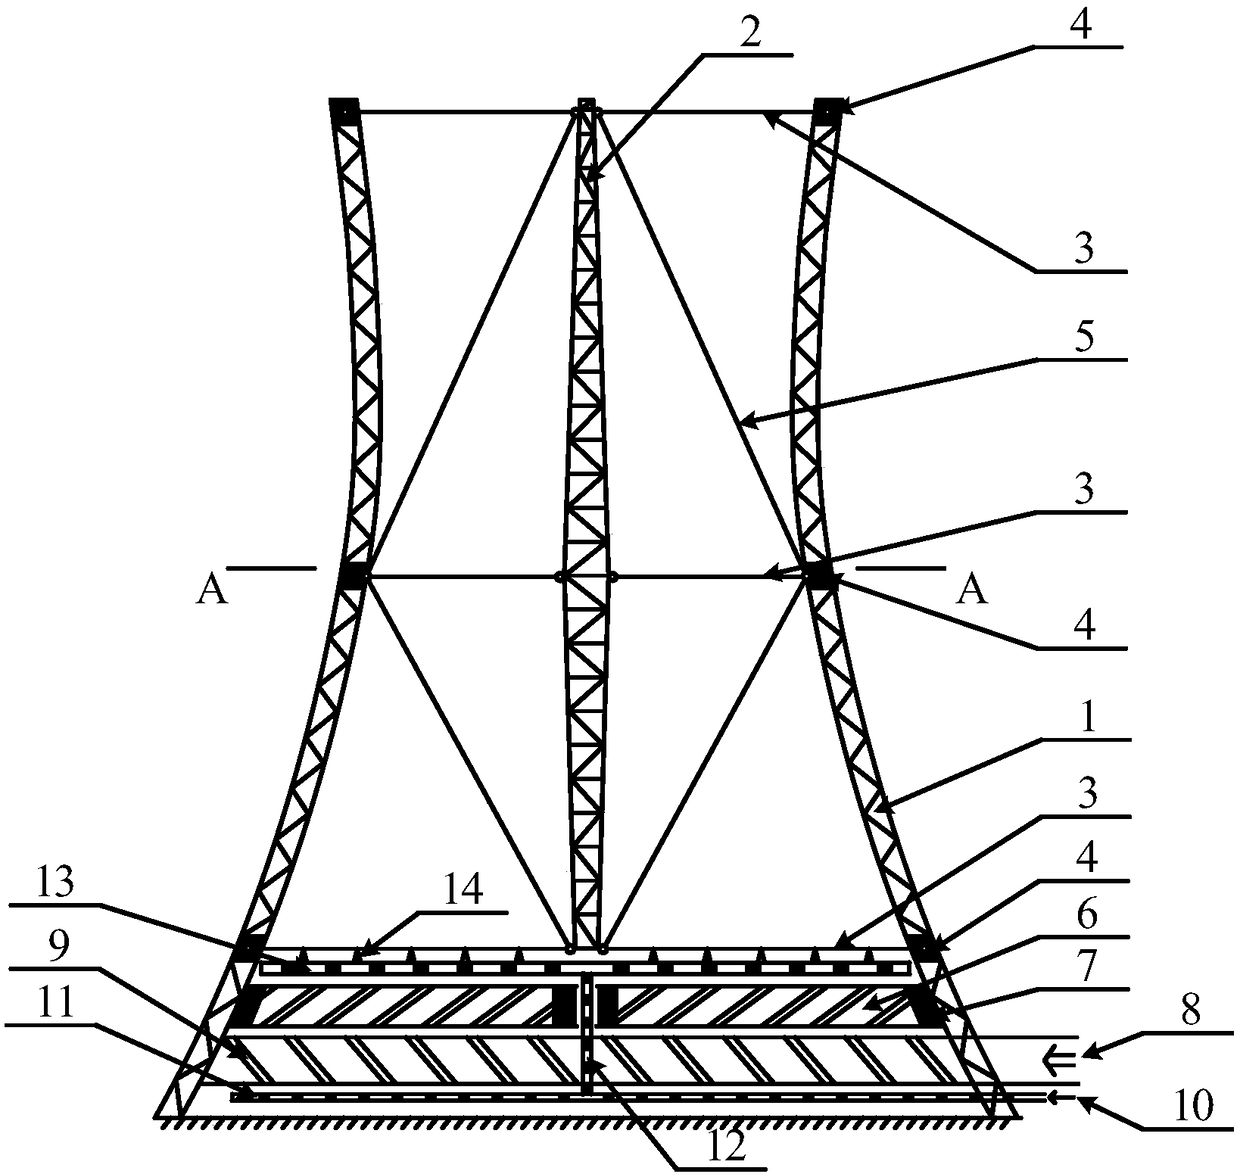 A Hybrid Steel Structure Grid Cooling Tower